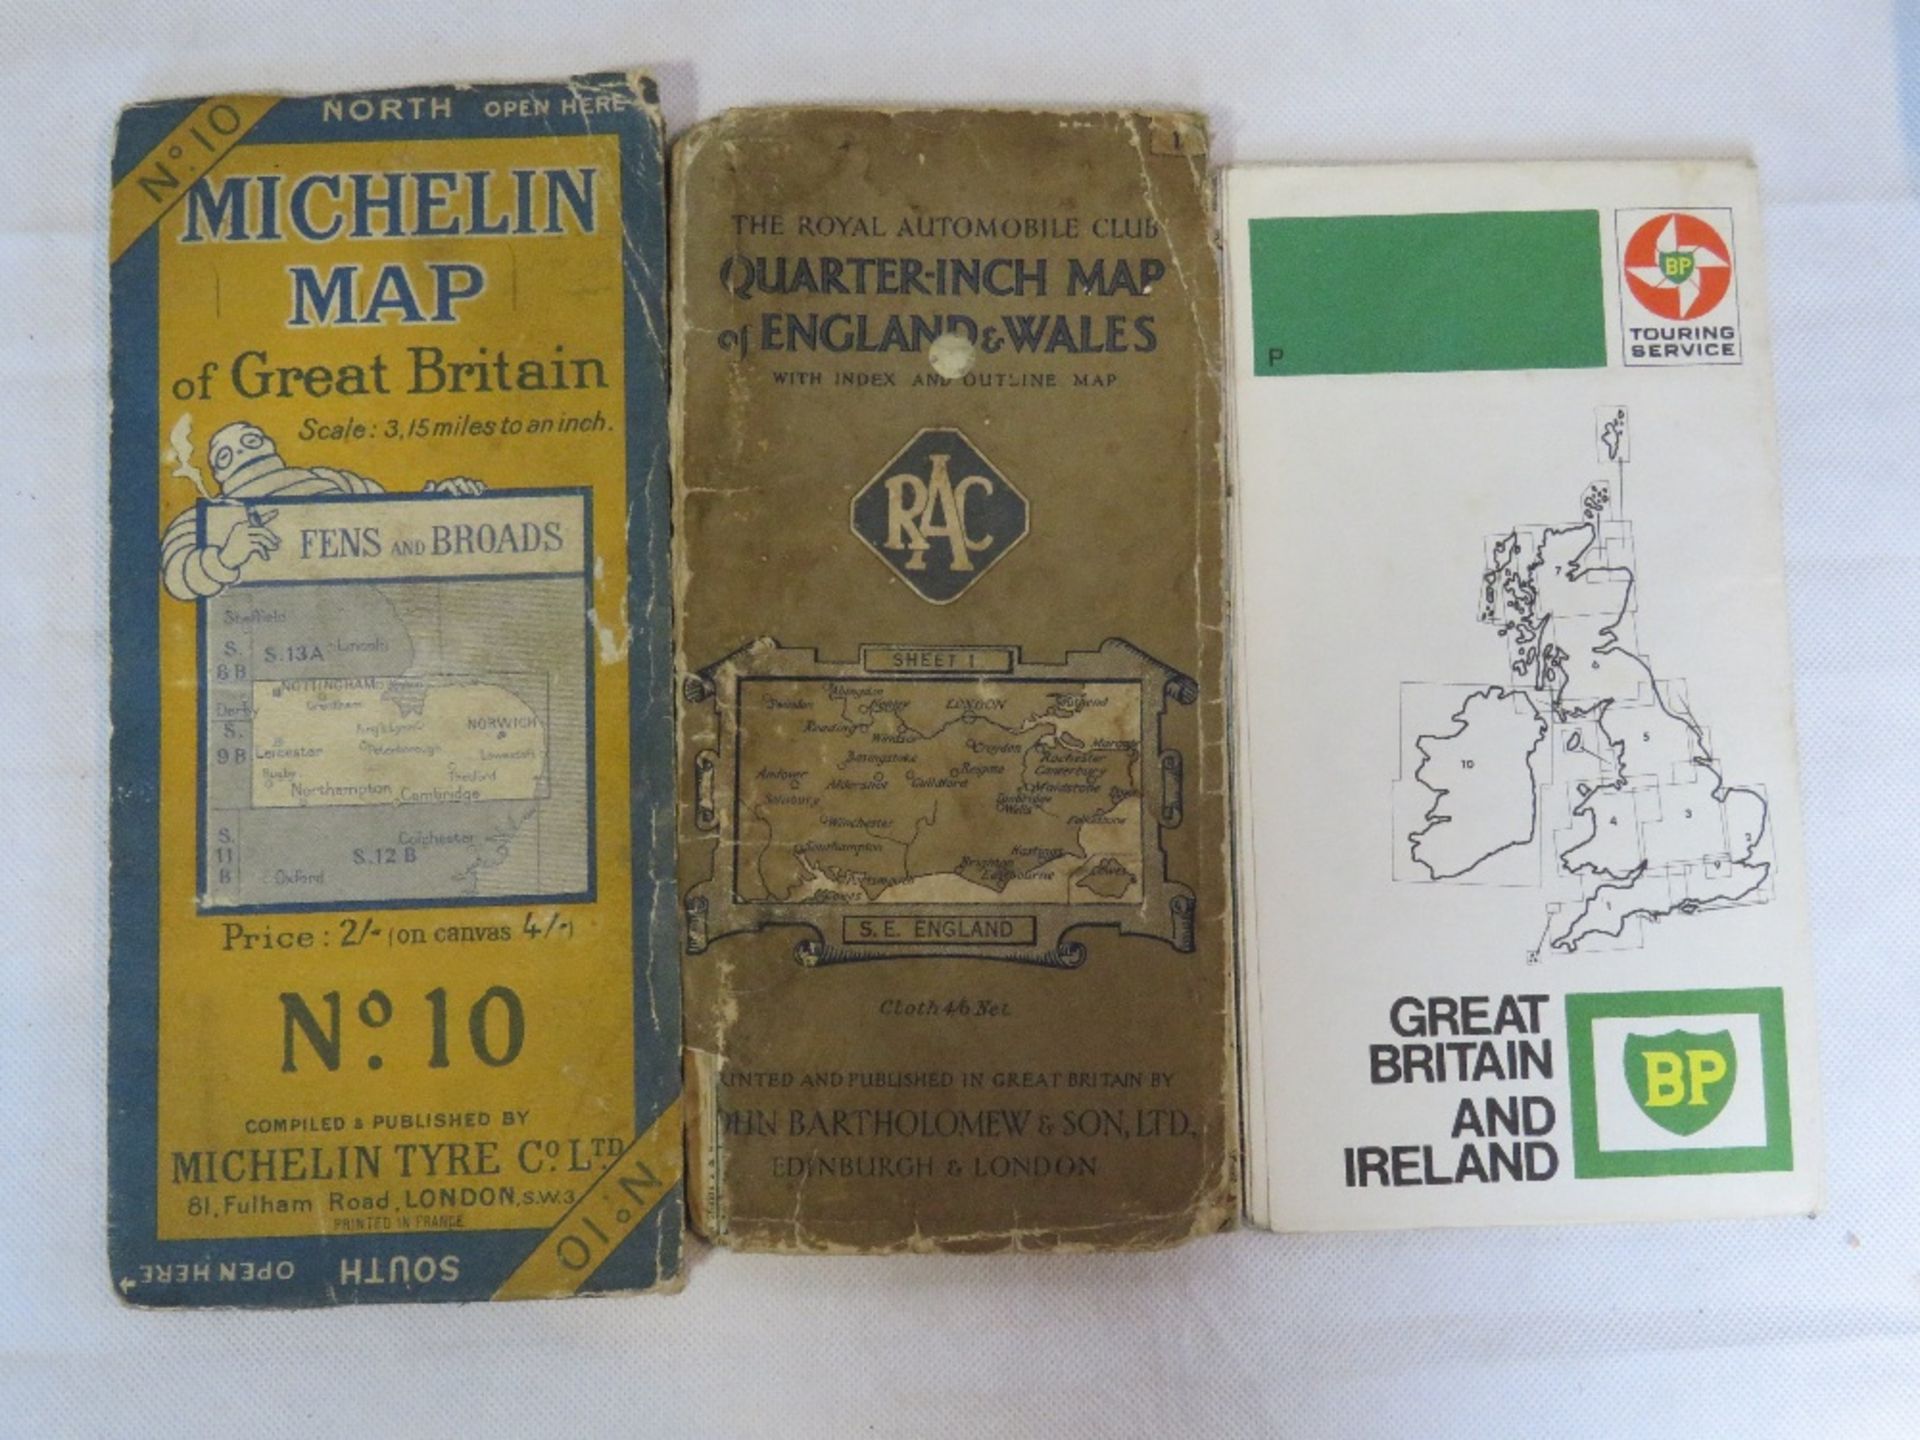 A John Bartholomew & Son Ltd cloth bound RAC quarter-inch map, together with two other road maps.